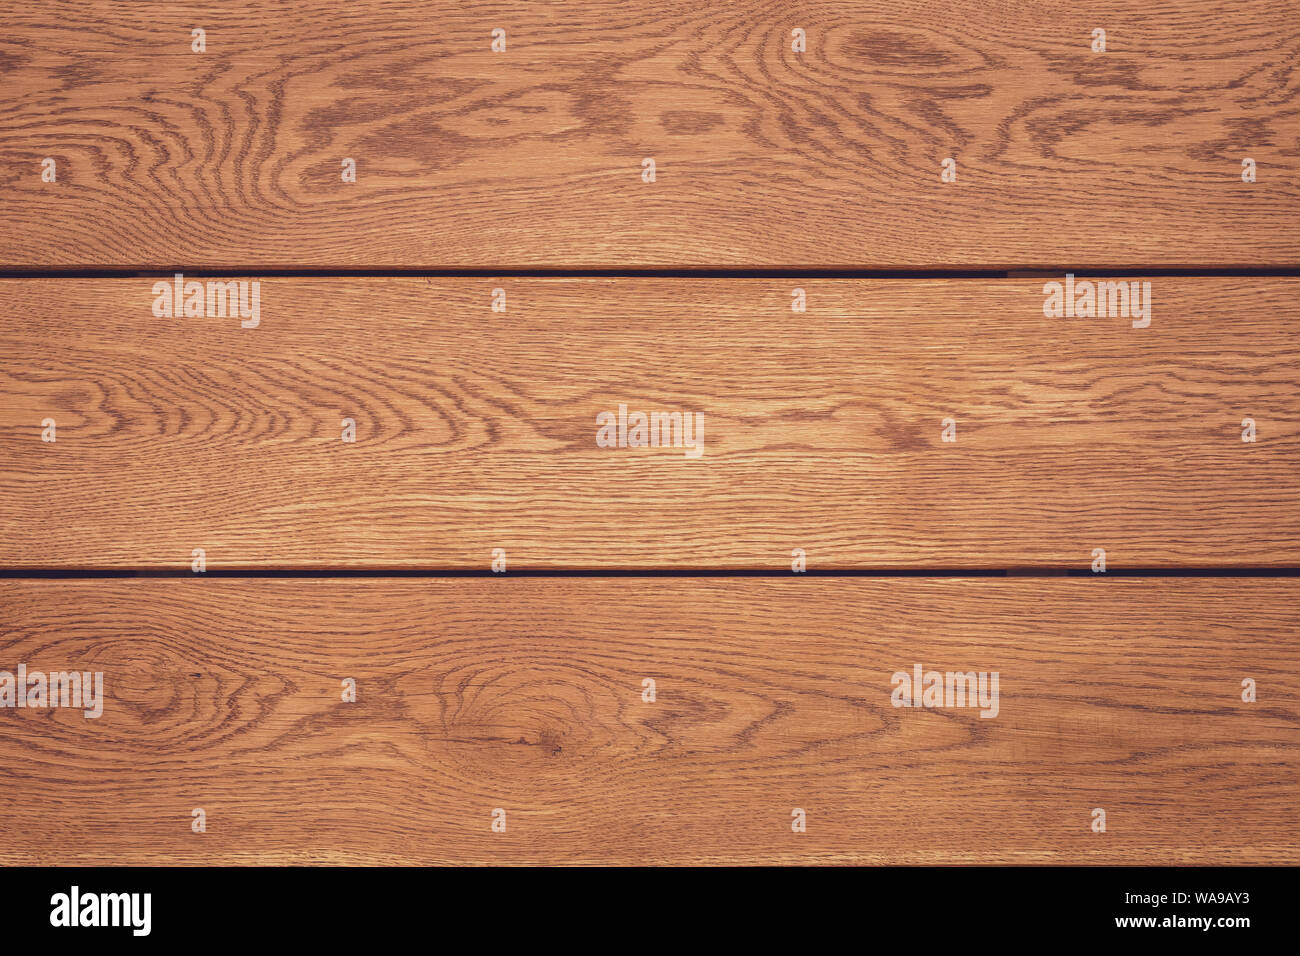 Light Wood Background Horizontal Lines On Wooden Table